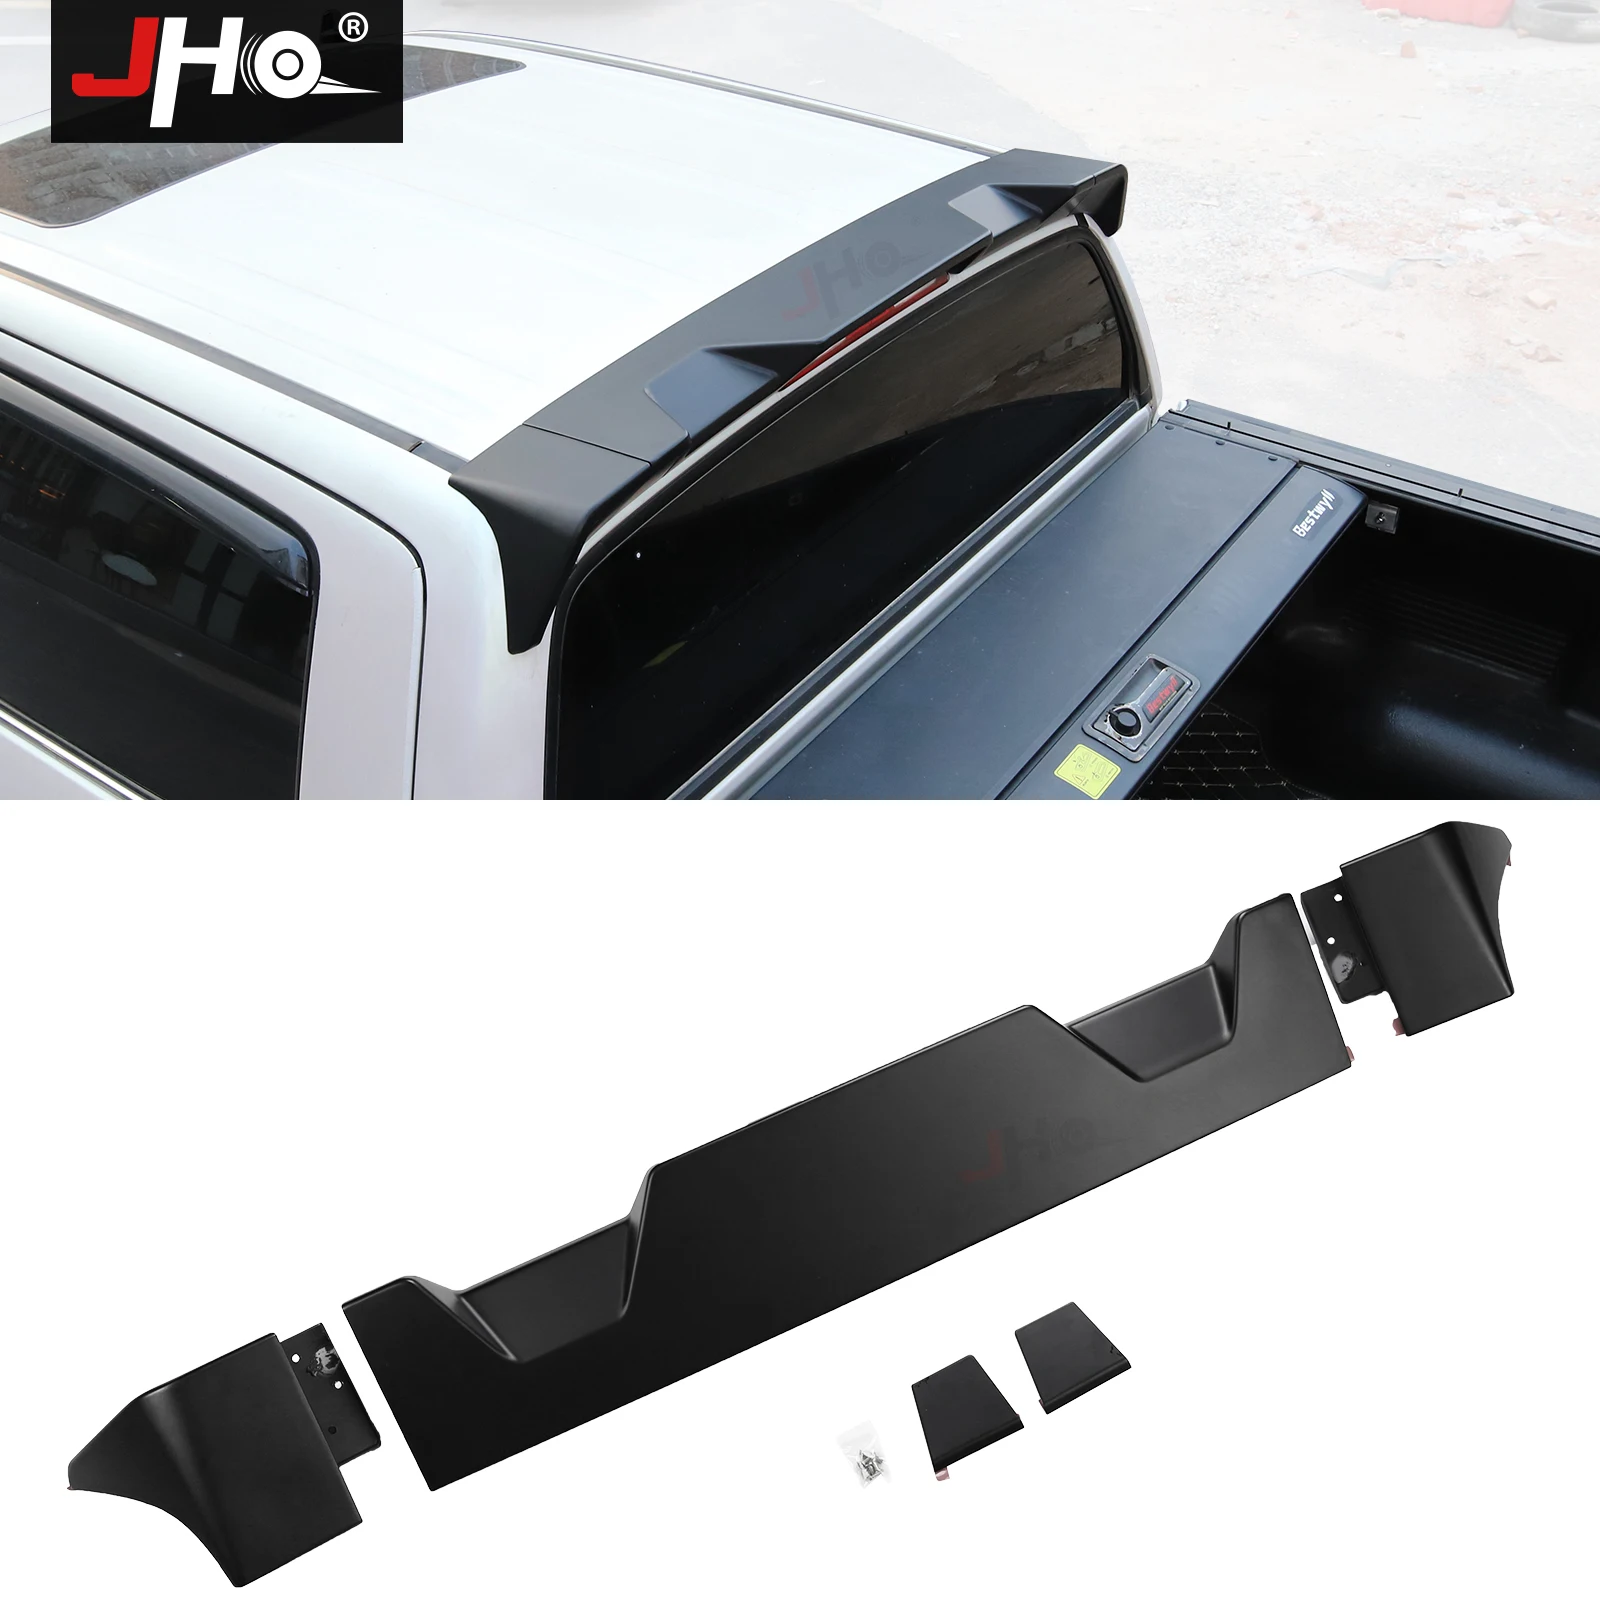 

JHO Car Tail Refit Roof Top Rear Window Spoiler Wing For Toyota Tundra 2014-2020 2019 2018 2017 2016 2015 Accessories